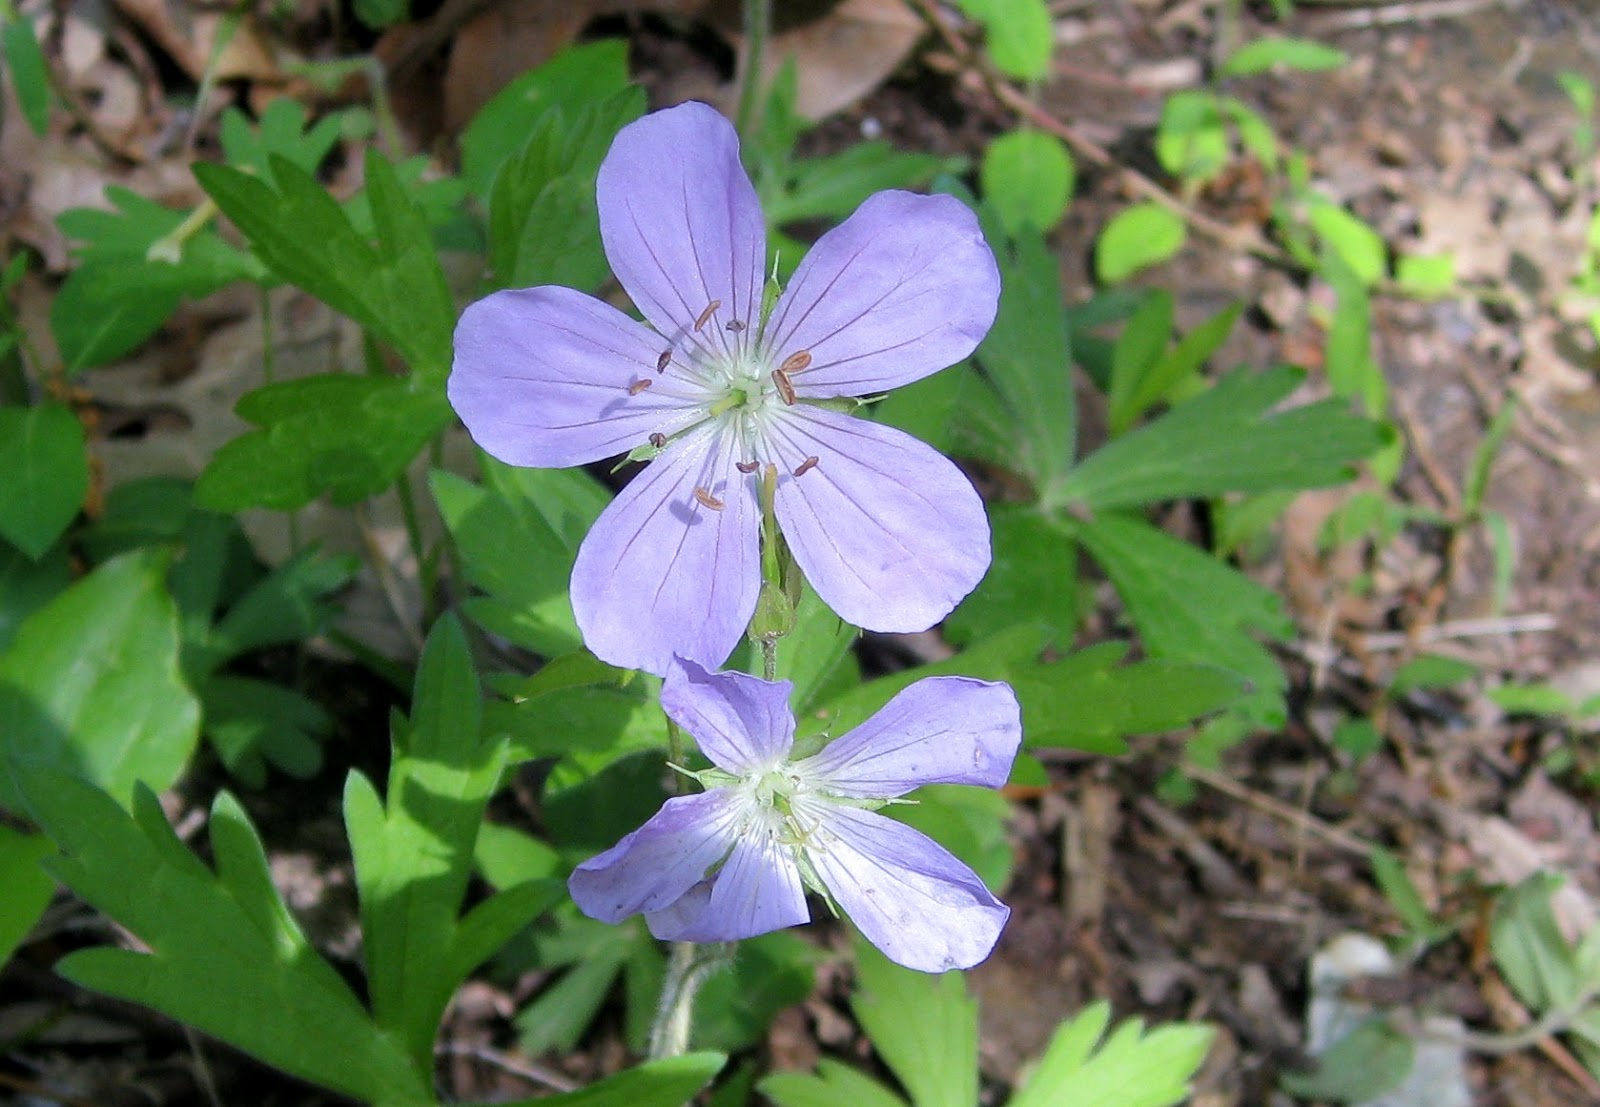 Image of wild geranium by K. R. Smith - may be used with attribution